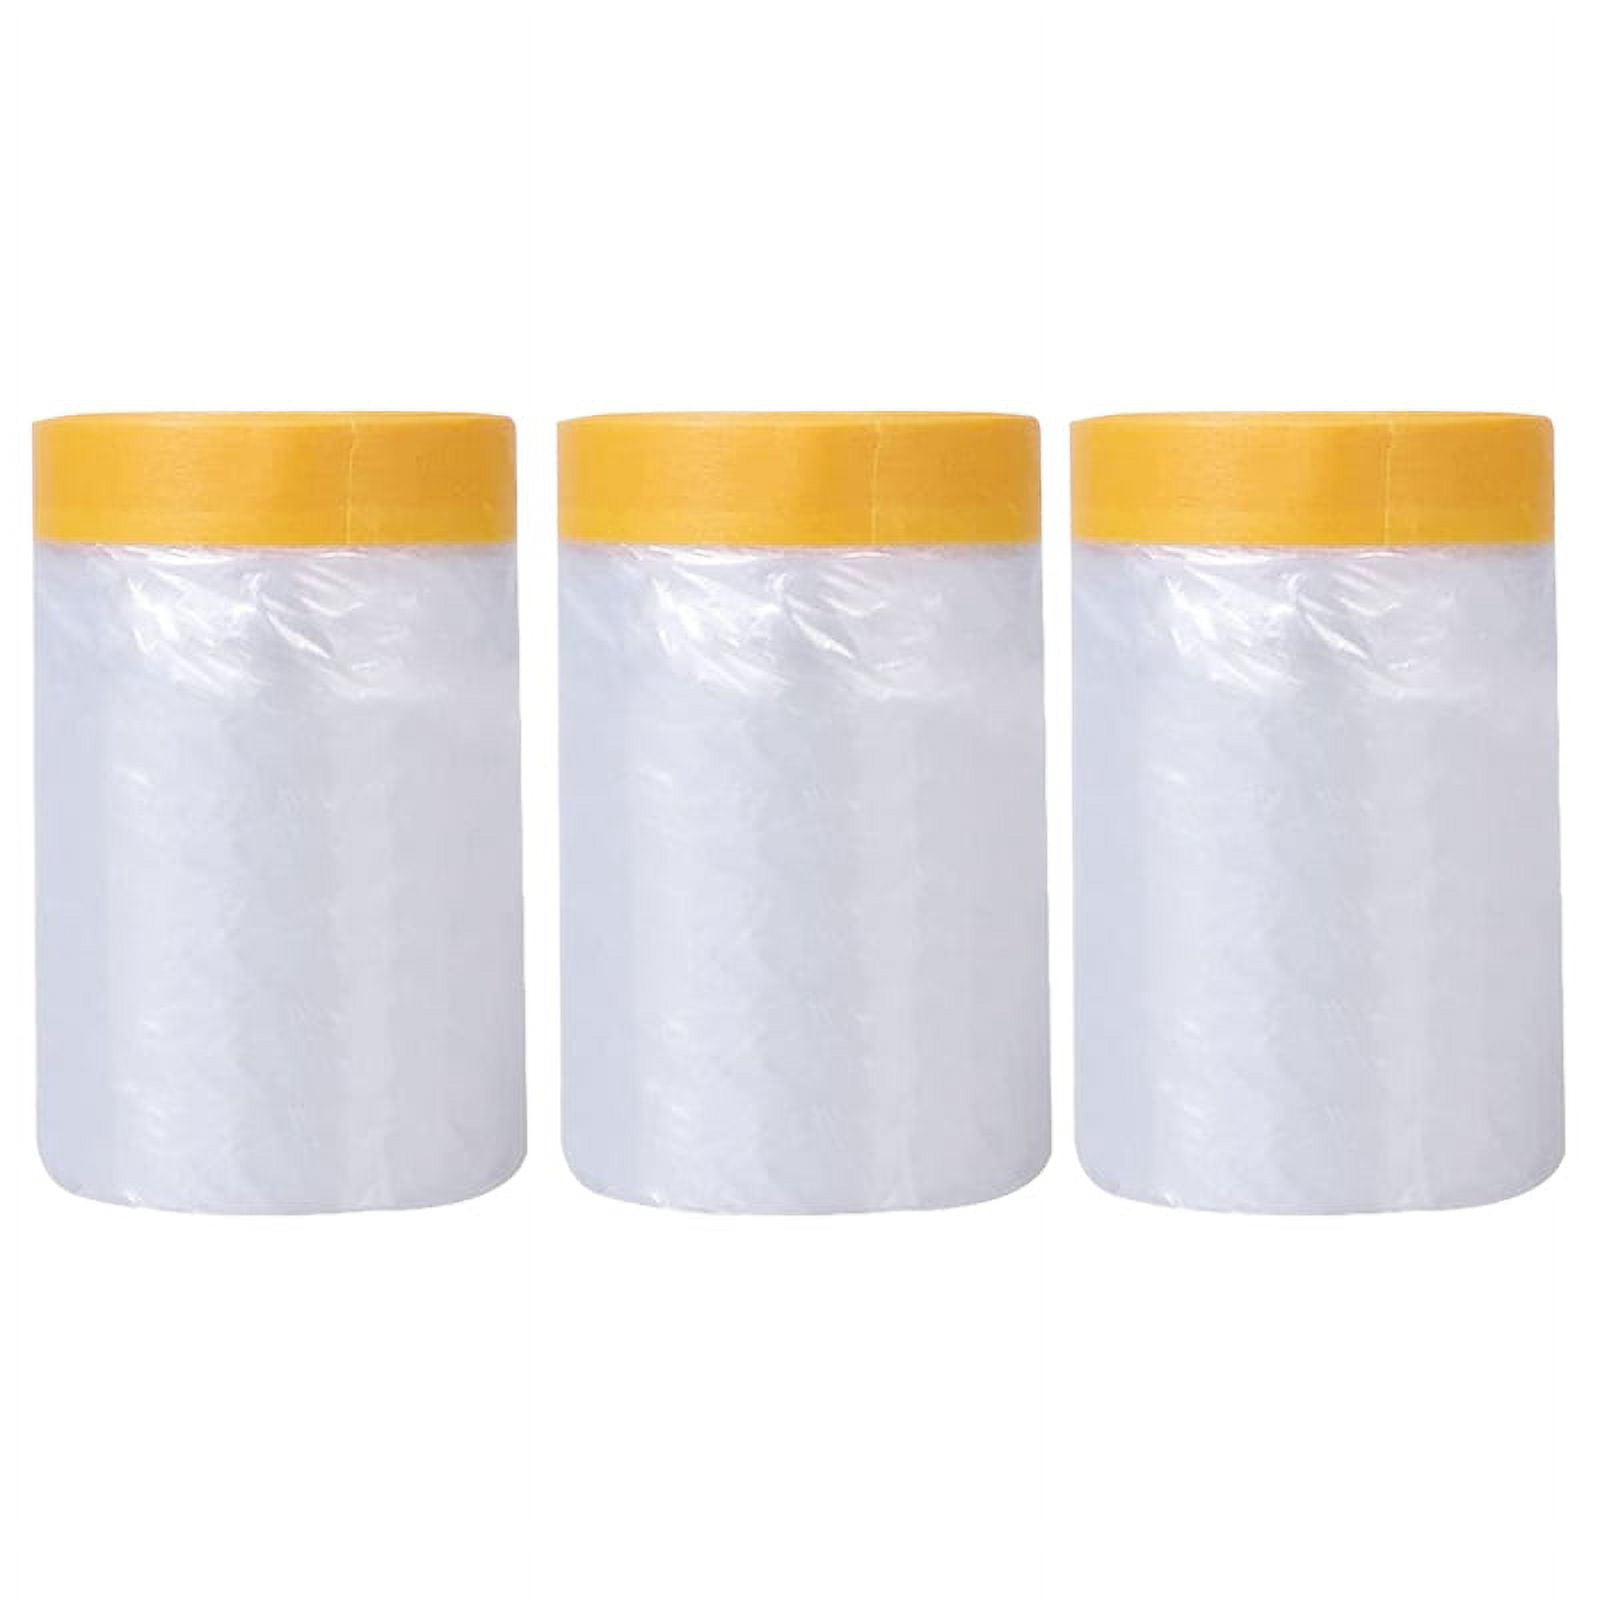 1 Roll Pre-Taped Masking Paper For Painting, Tape And Drape